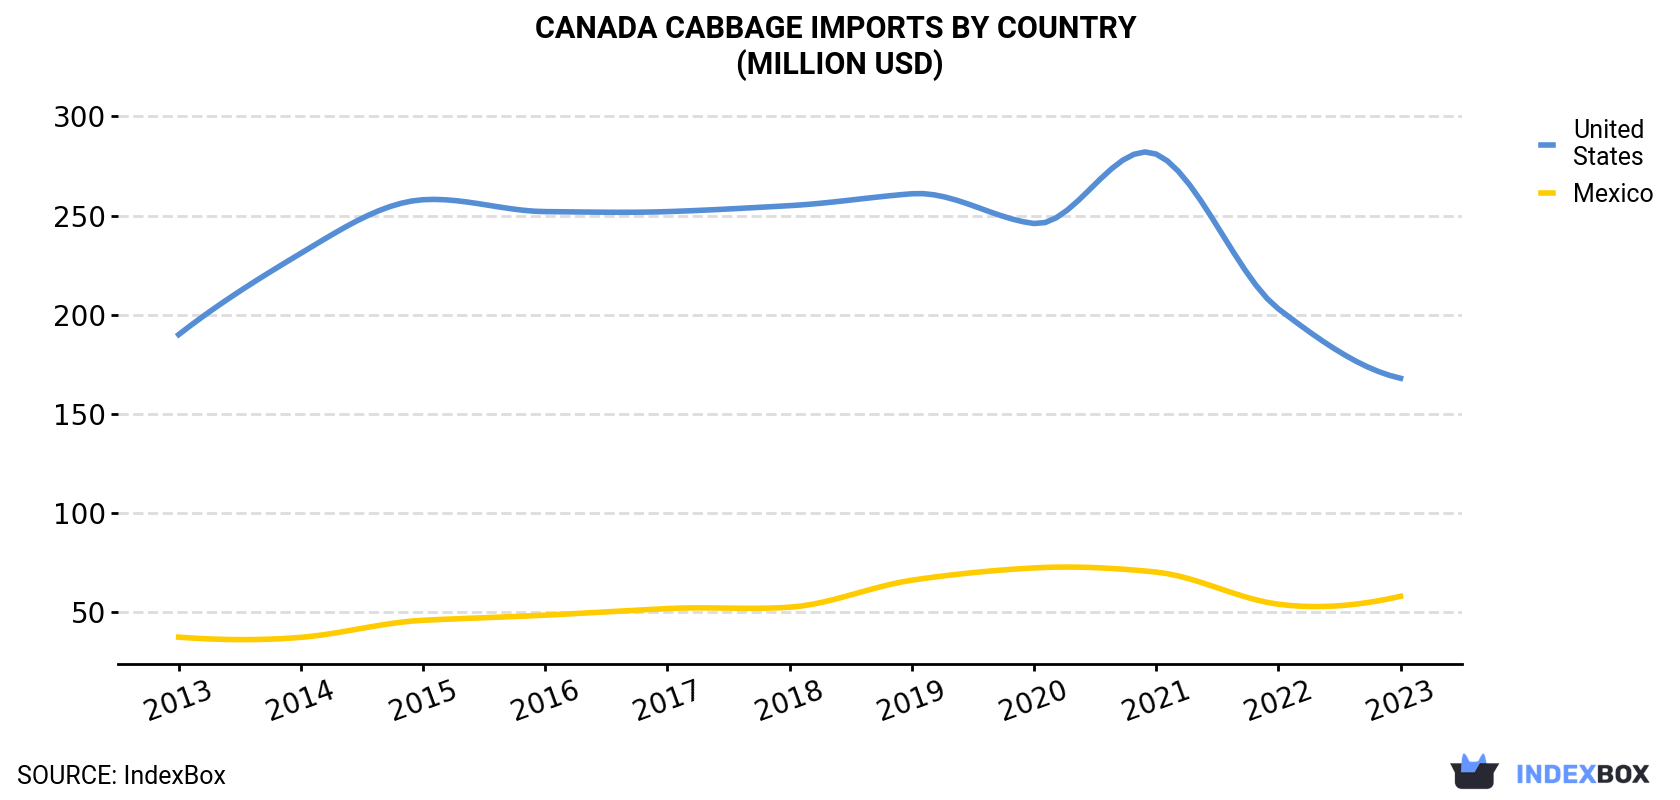 Canada Cabbage Imports By Country (Million USD)